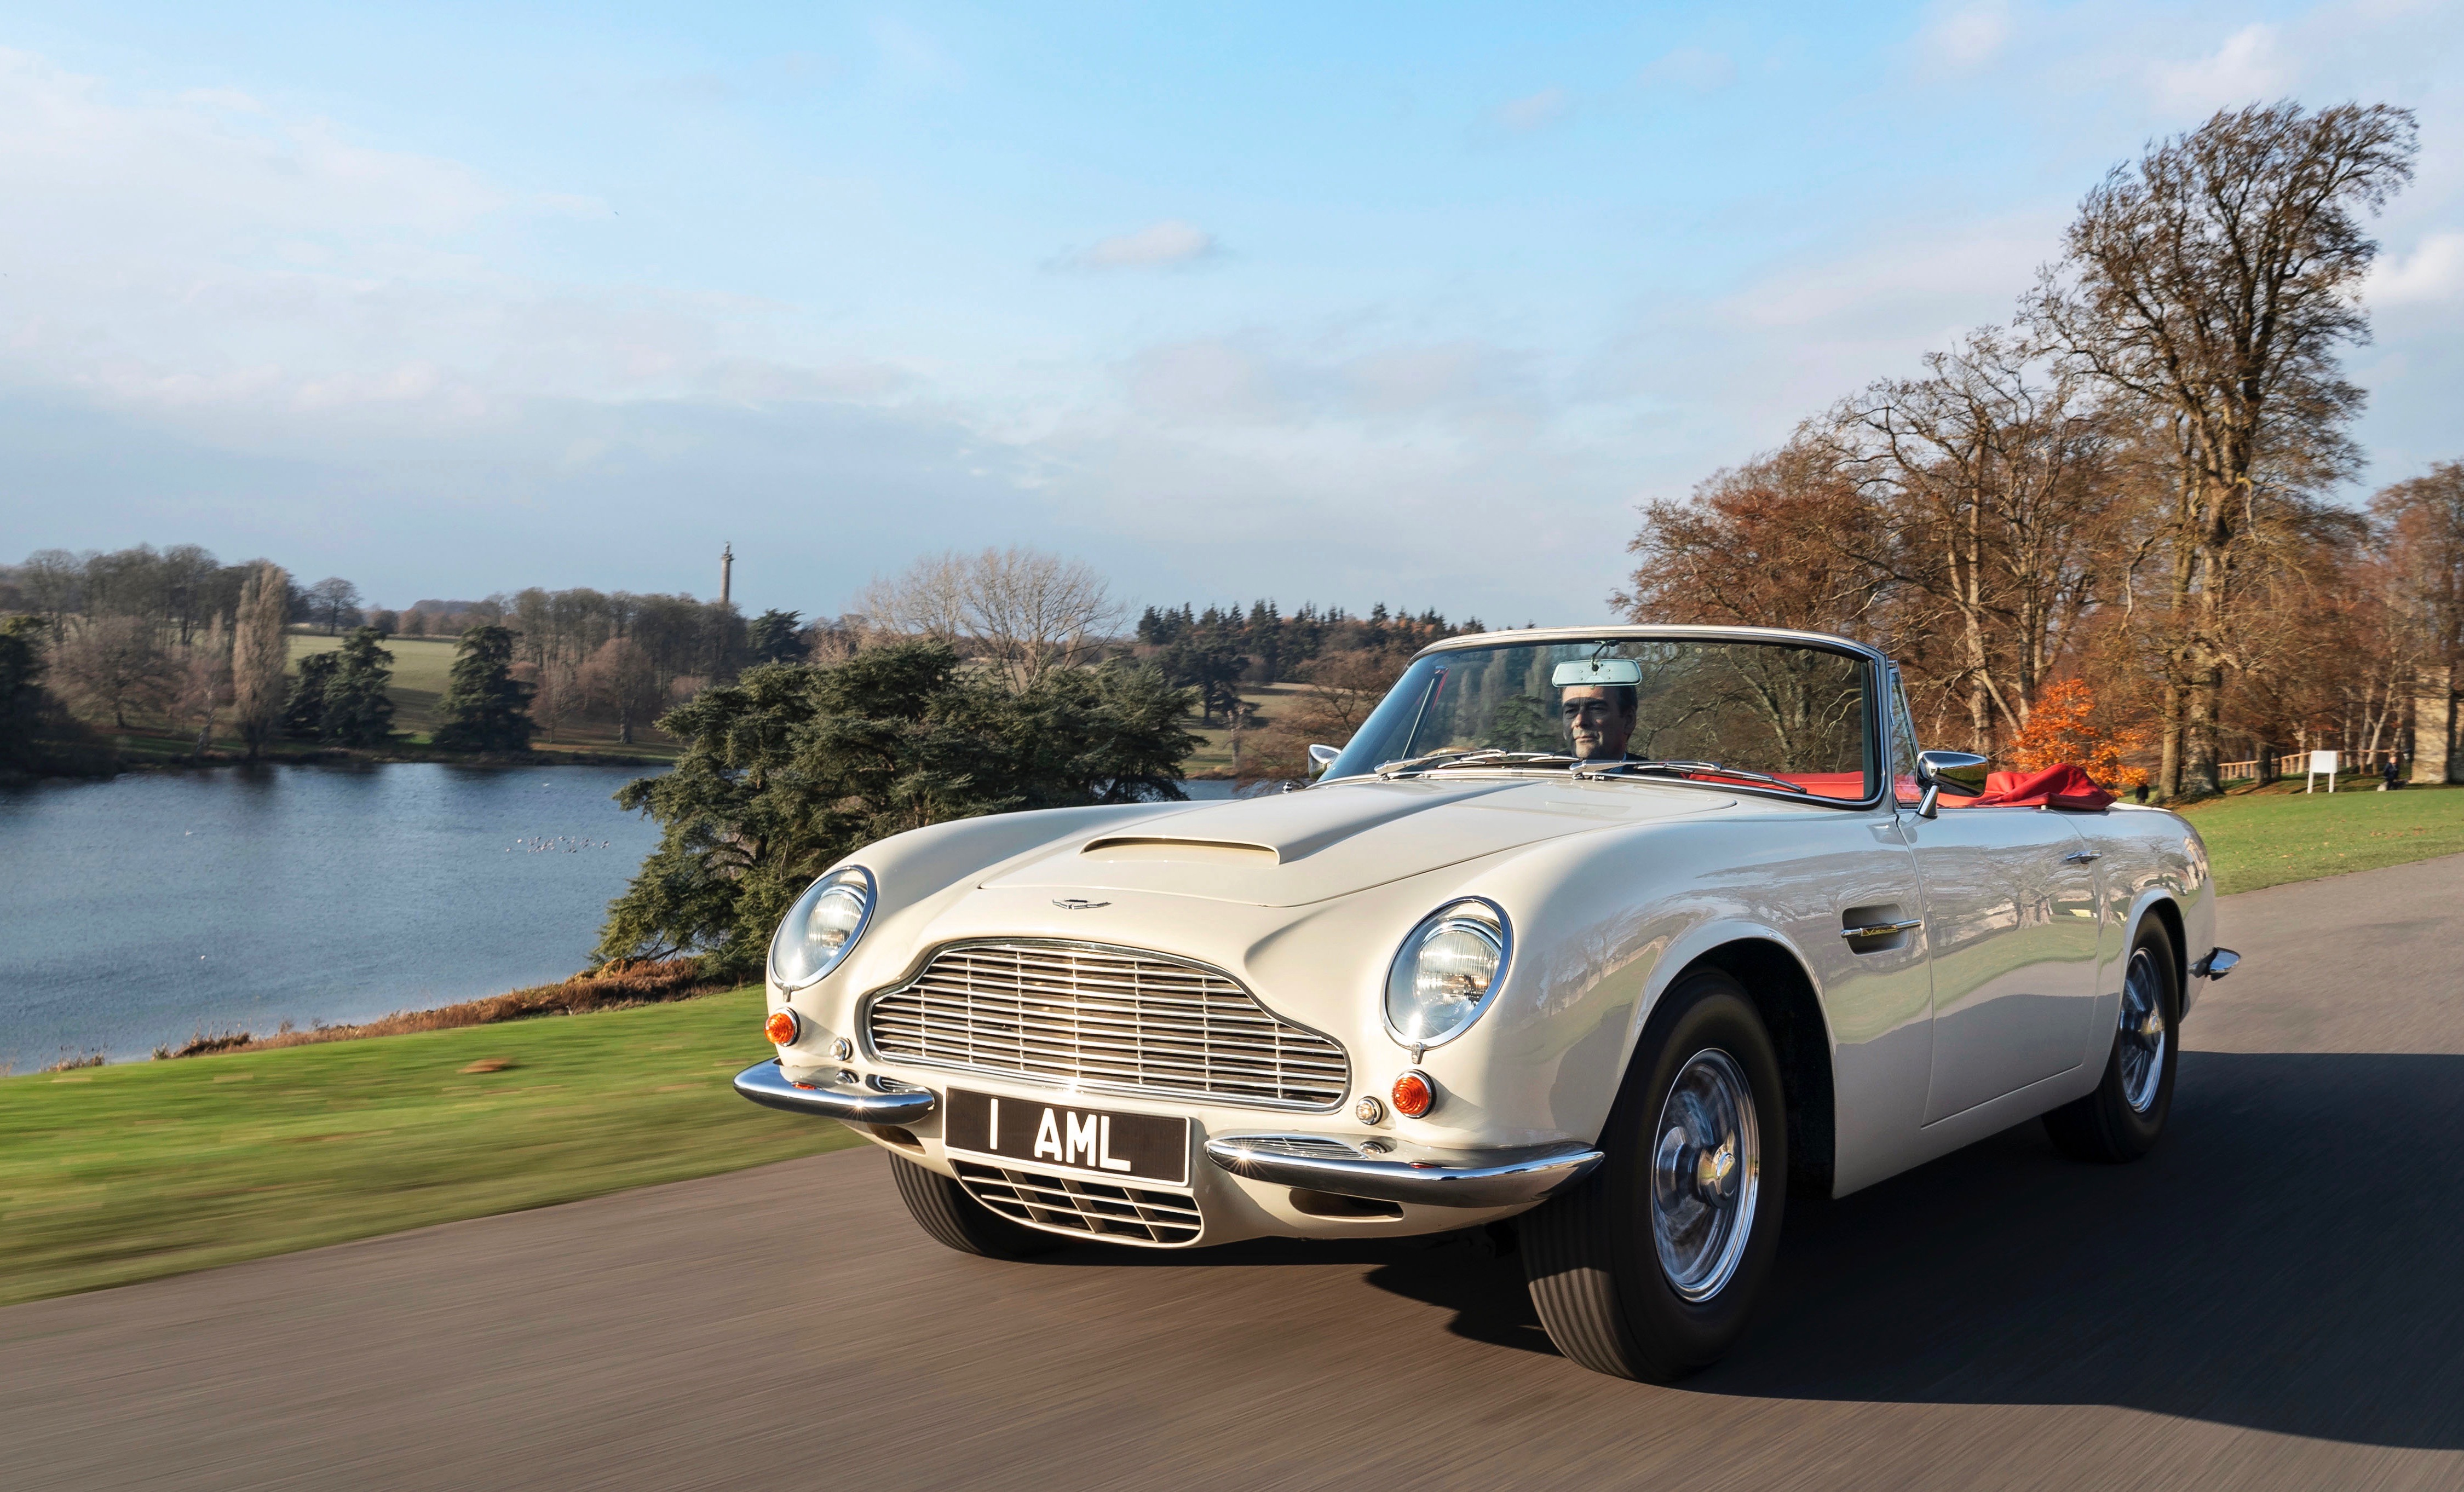 Aston Martin, Aston Martin develops ‘first reversible’ EV system to protect vintage vehicles, ClassicCars.com Journal